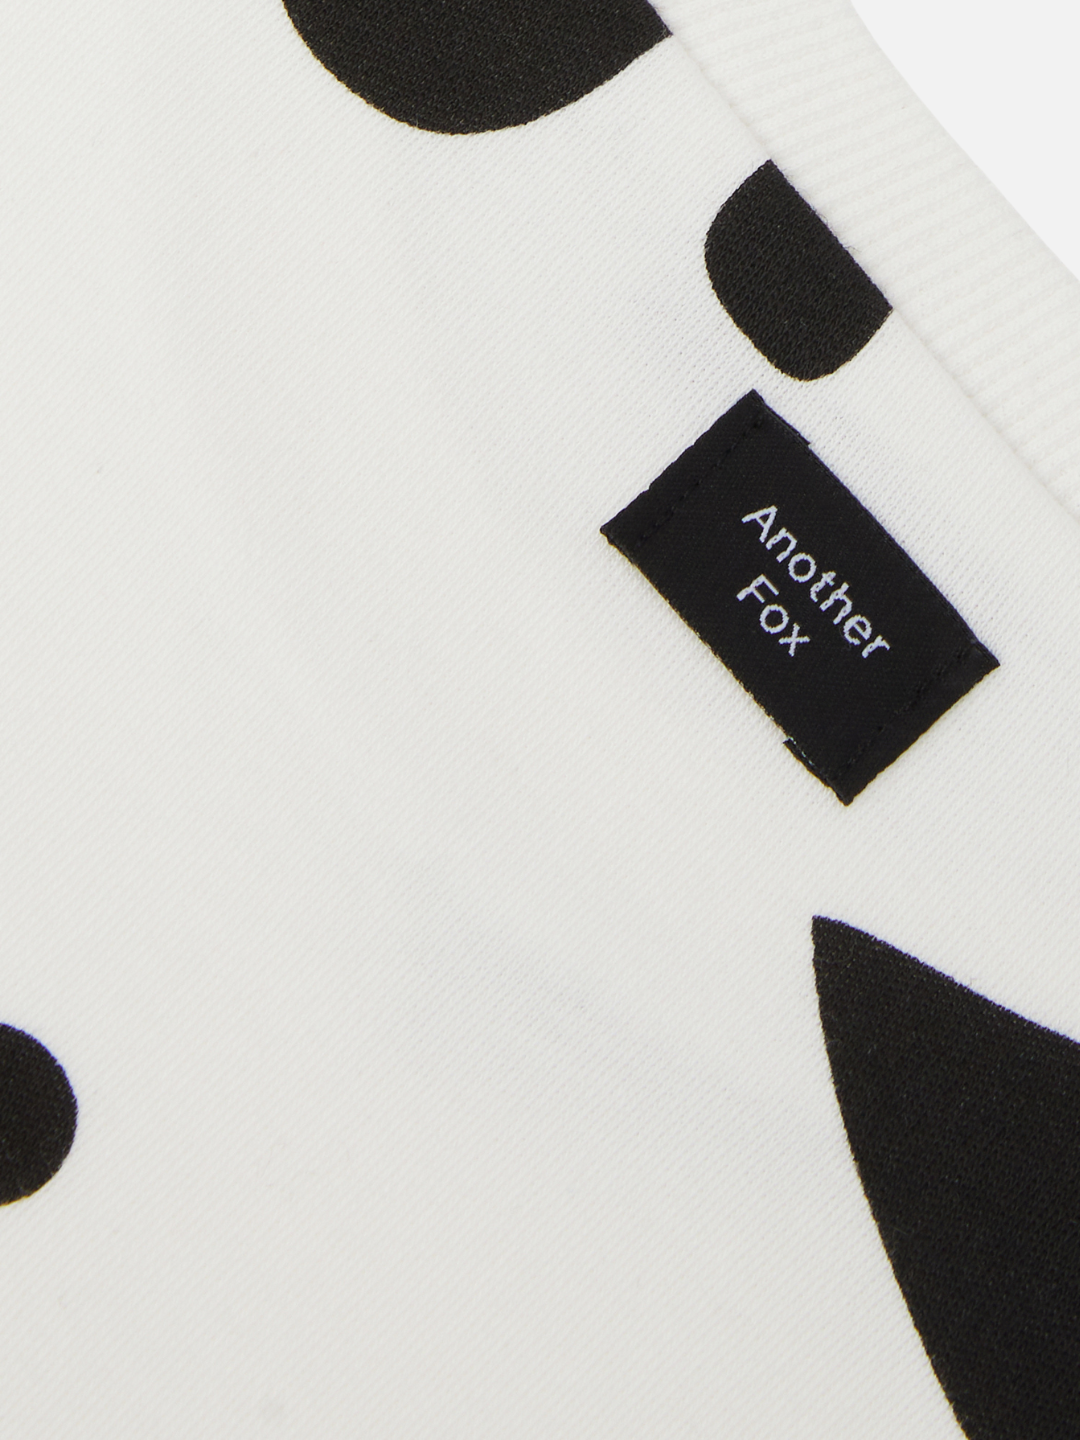 Close-up detail of the neck binding on a kids' tee black and white shirt, showing maker's label